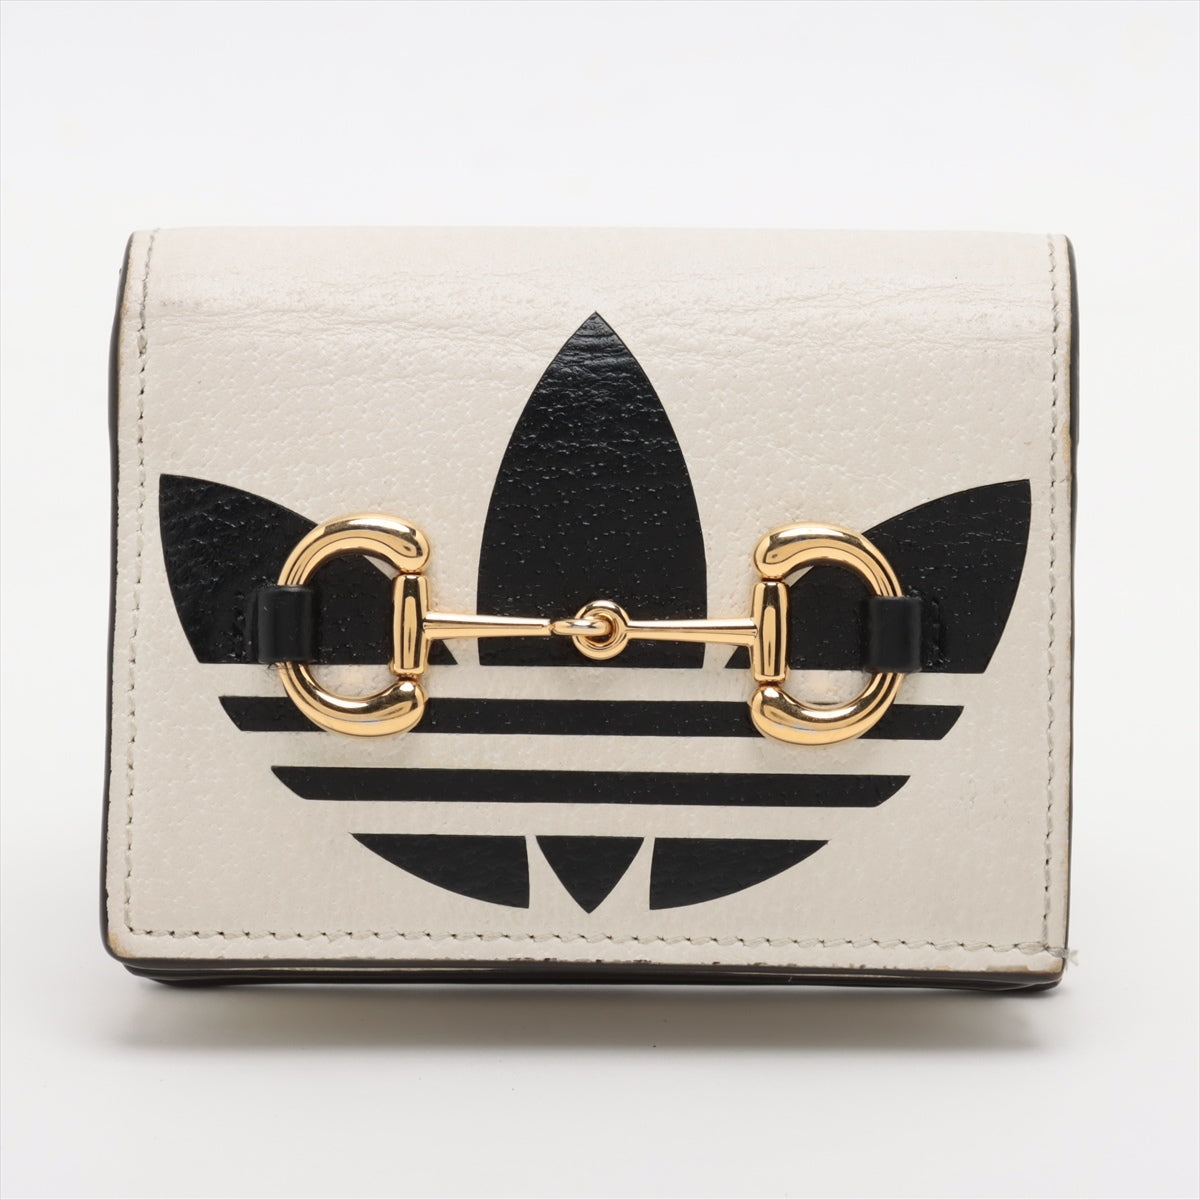 Gucci x Adidas HorseBit Leather Compact Wallet Ivory 702248